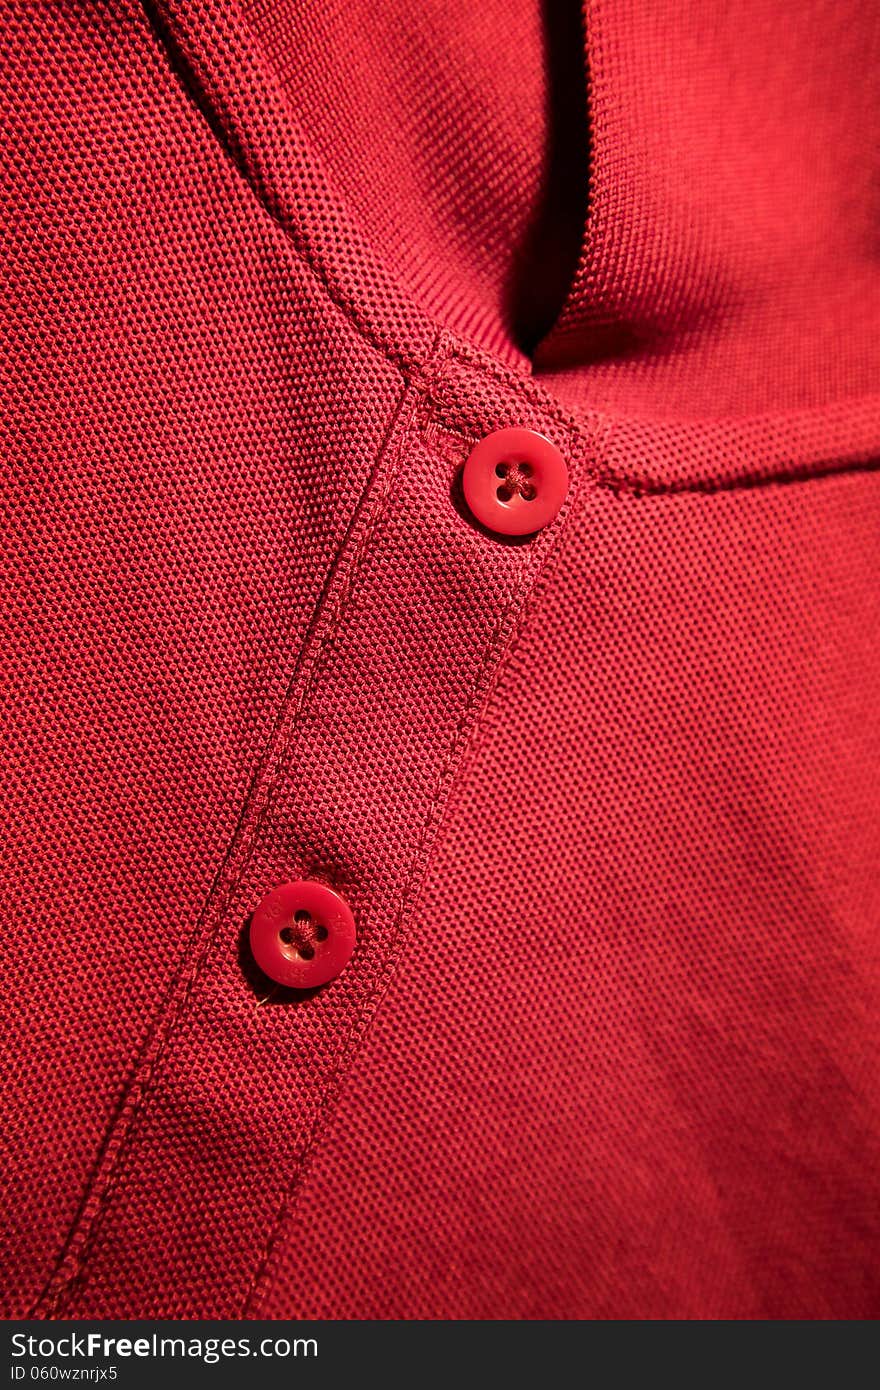 Red t-shirt details:neckline and buttons. Red t-shirt details:neckline and buttons